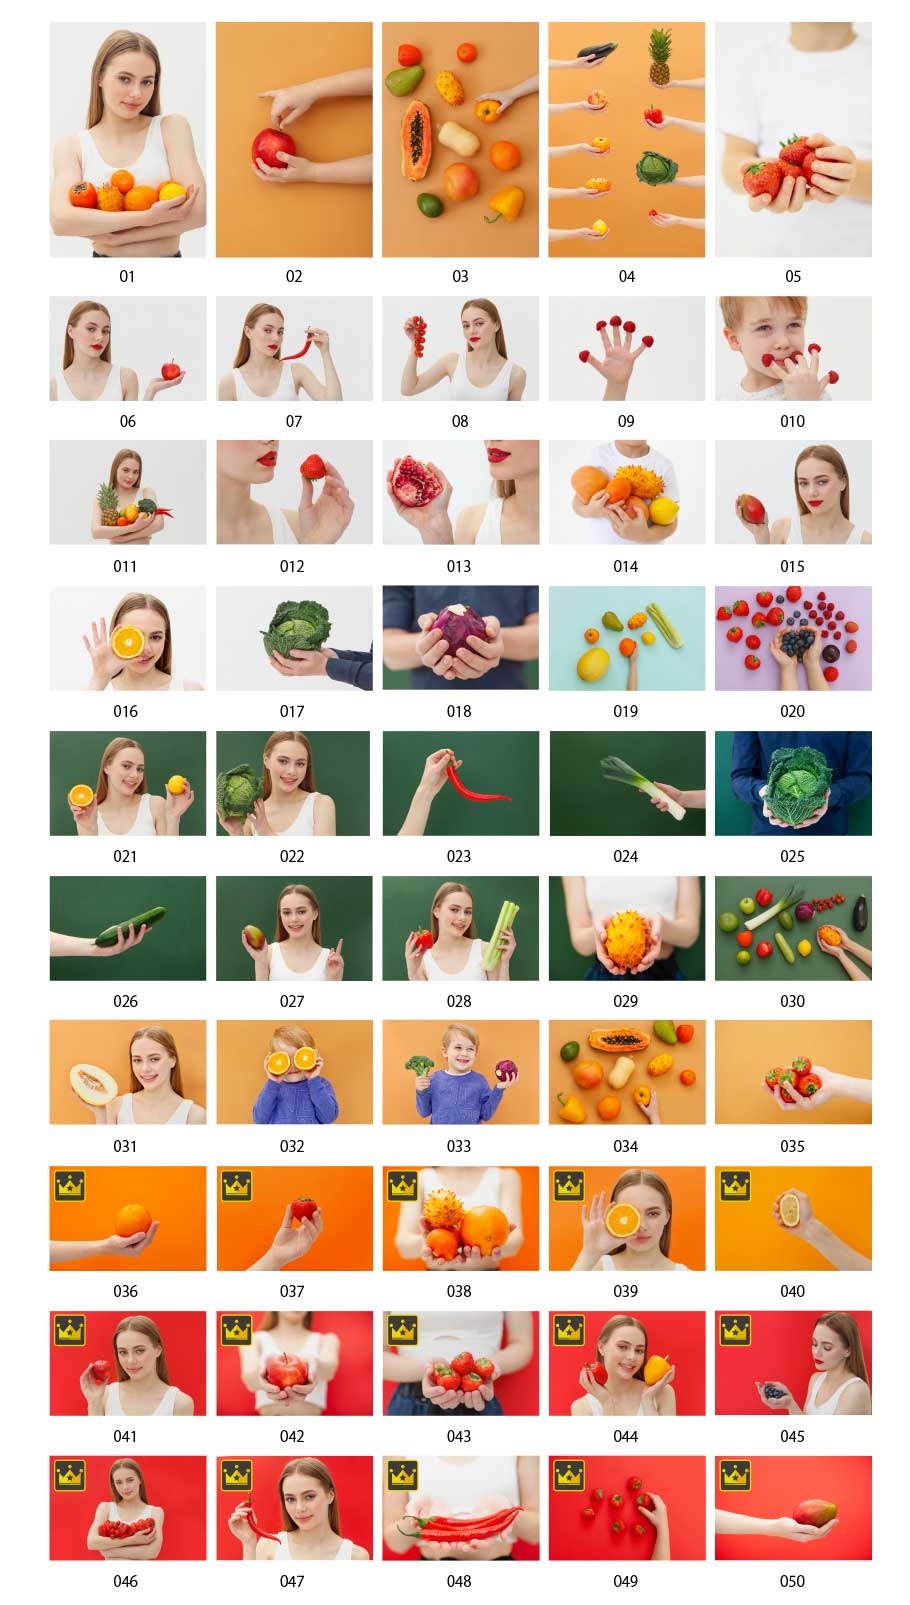 Pictures of vegetables and fruits